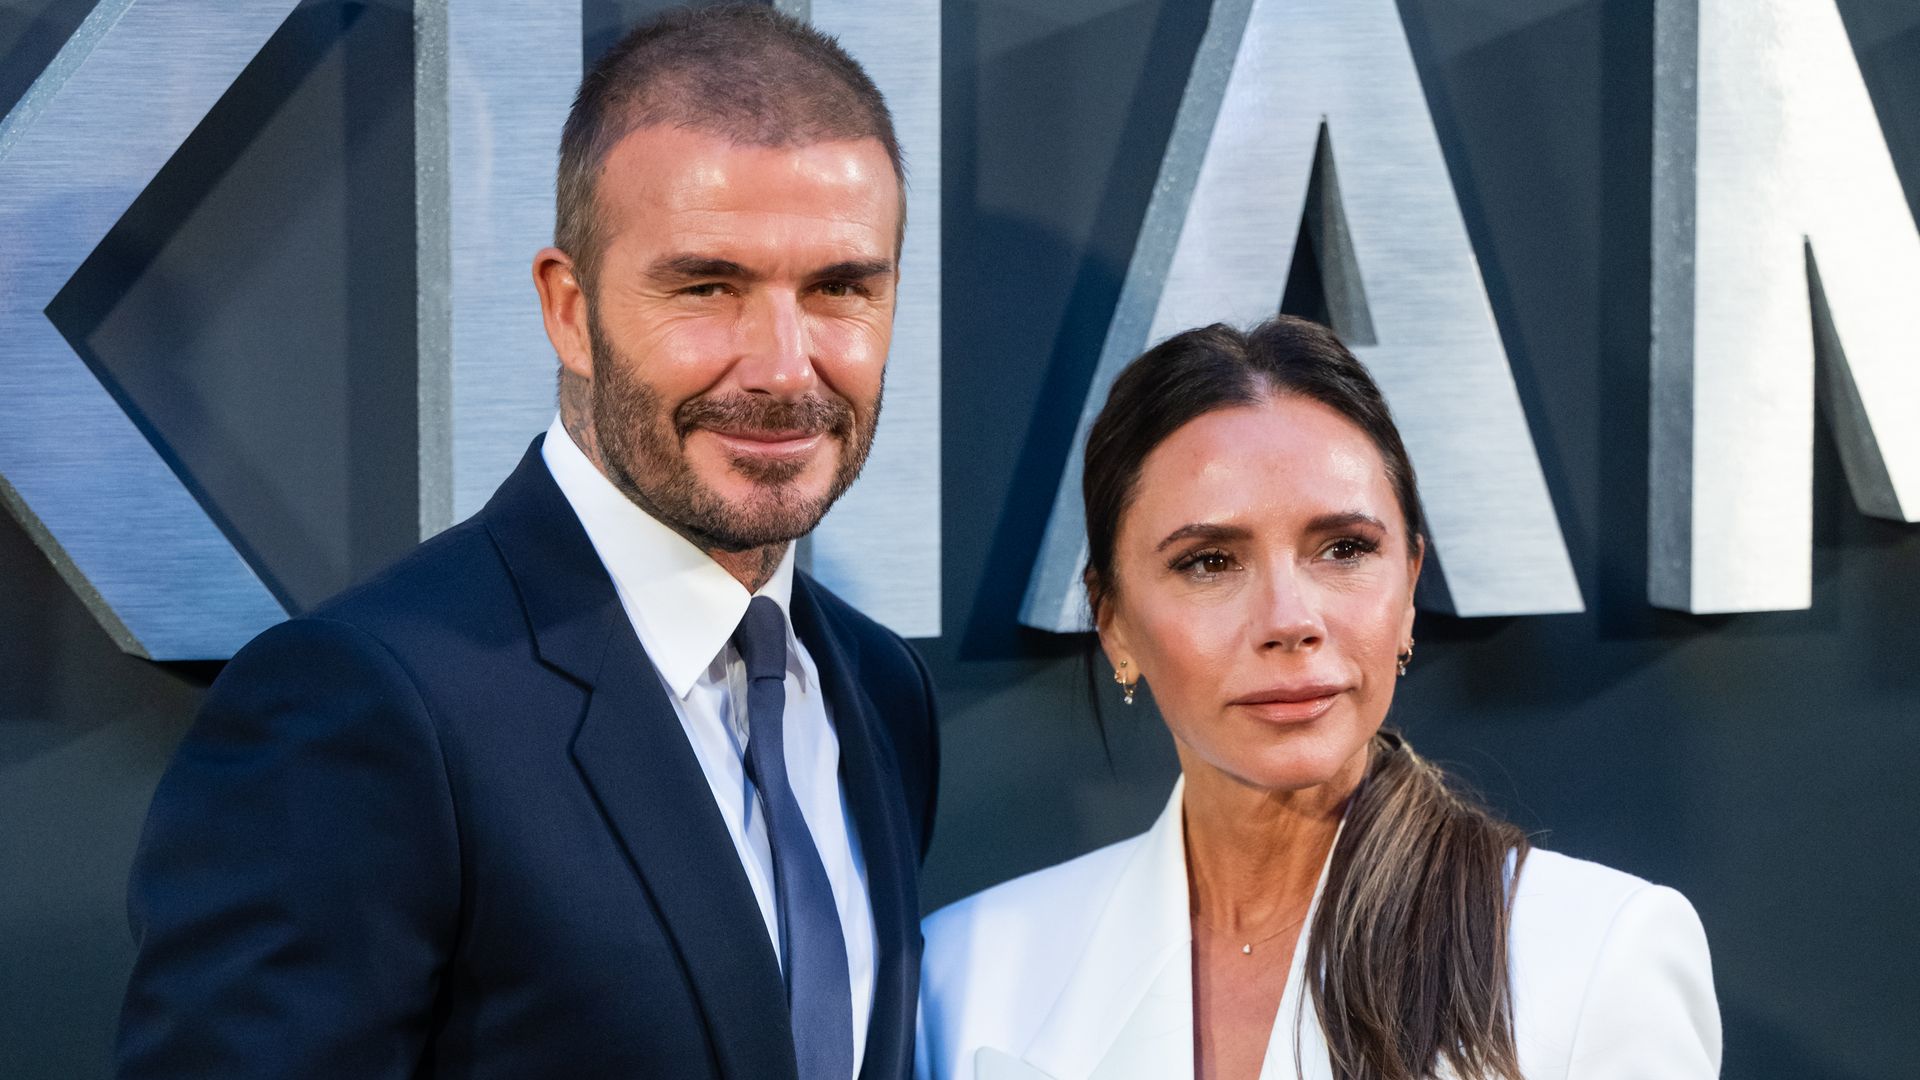 Victoria Beckham shares touching tribute to very rarely-seen sister-in-law